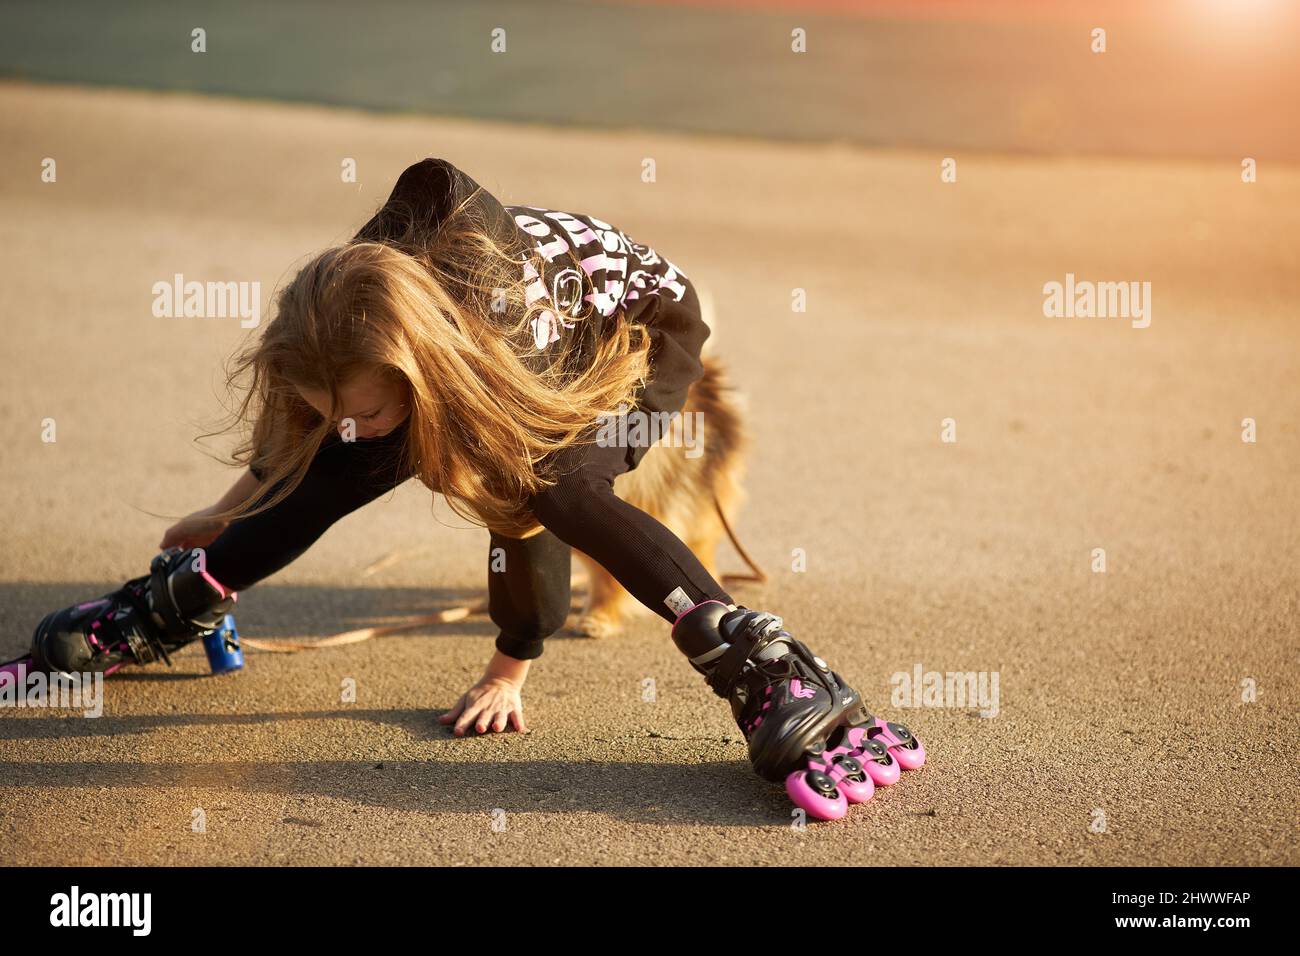 Cute child girl riding on roller skates and fall down in the park Stock Photo